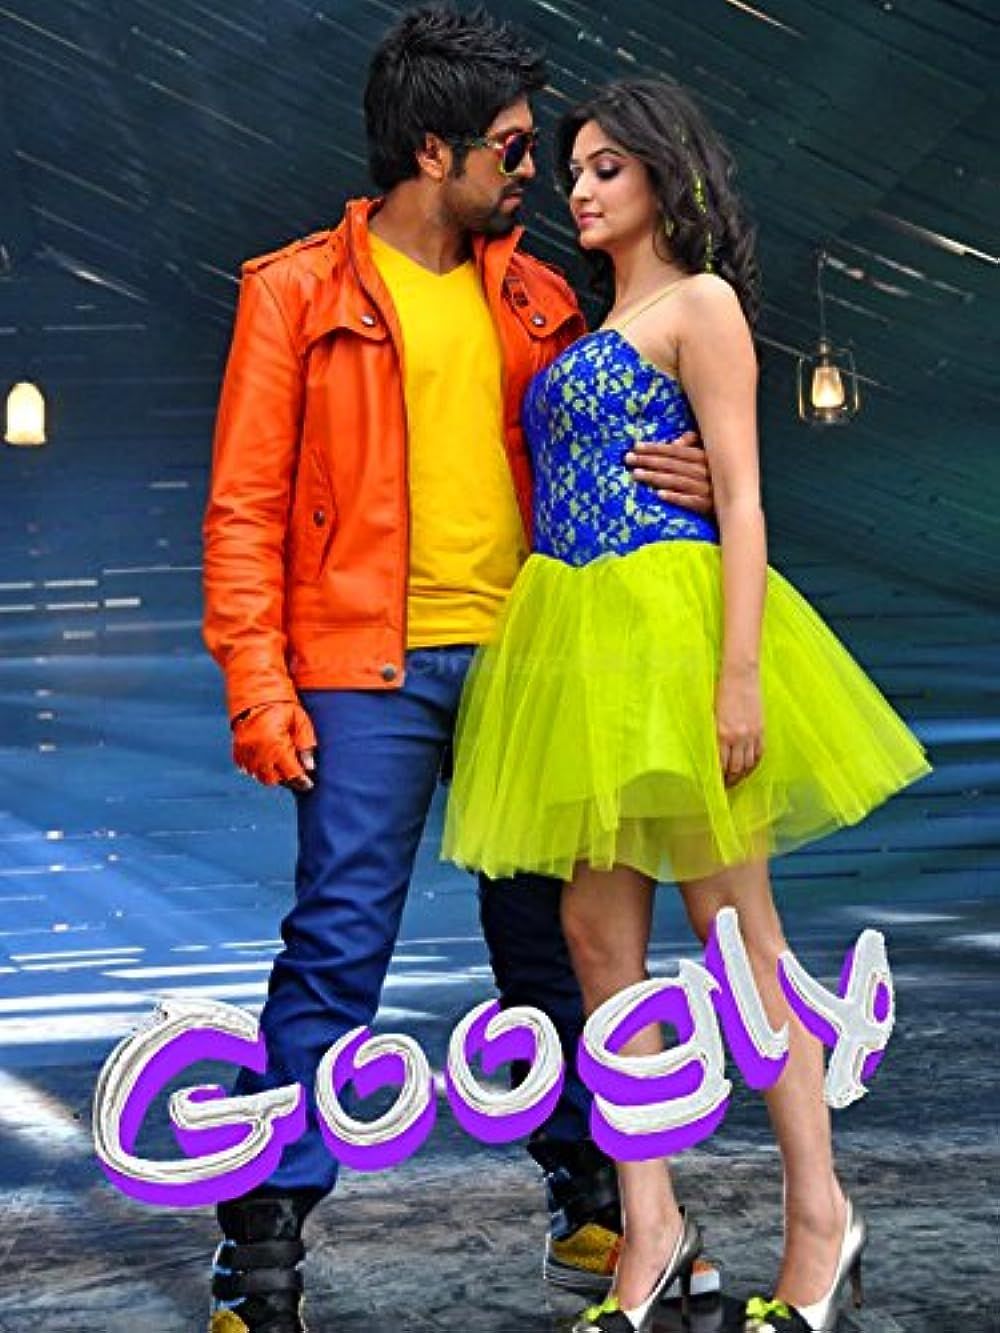 Googly (2013) Hindi Dubbed Movie download full movie